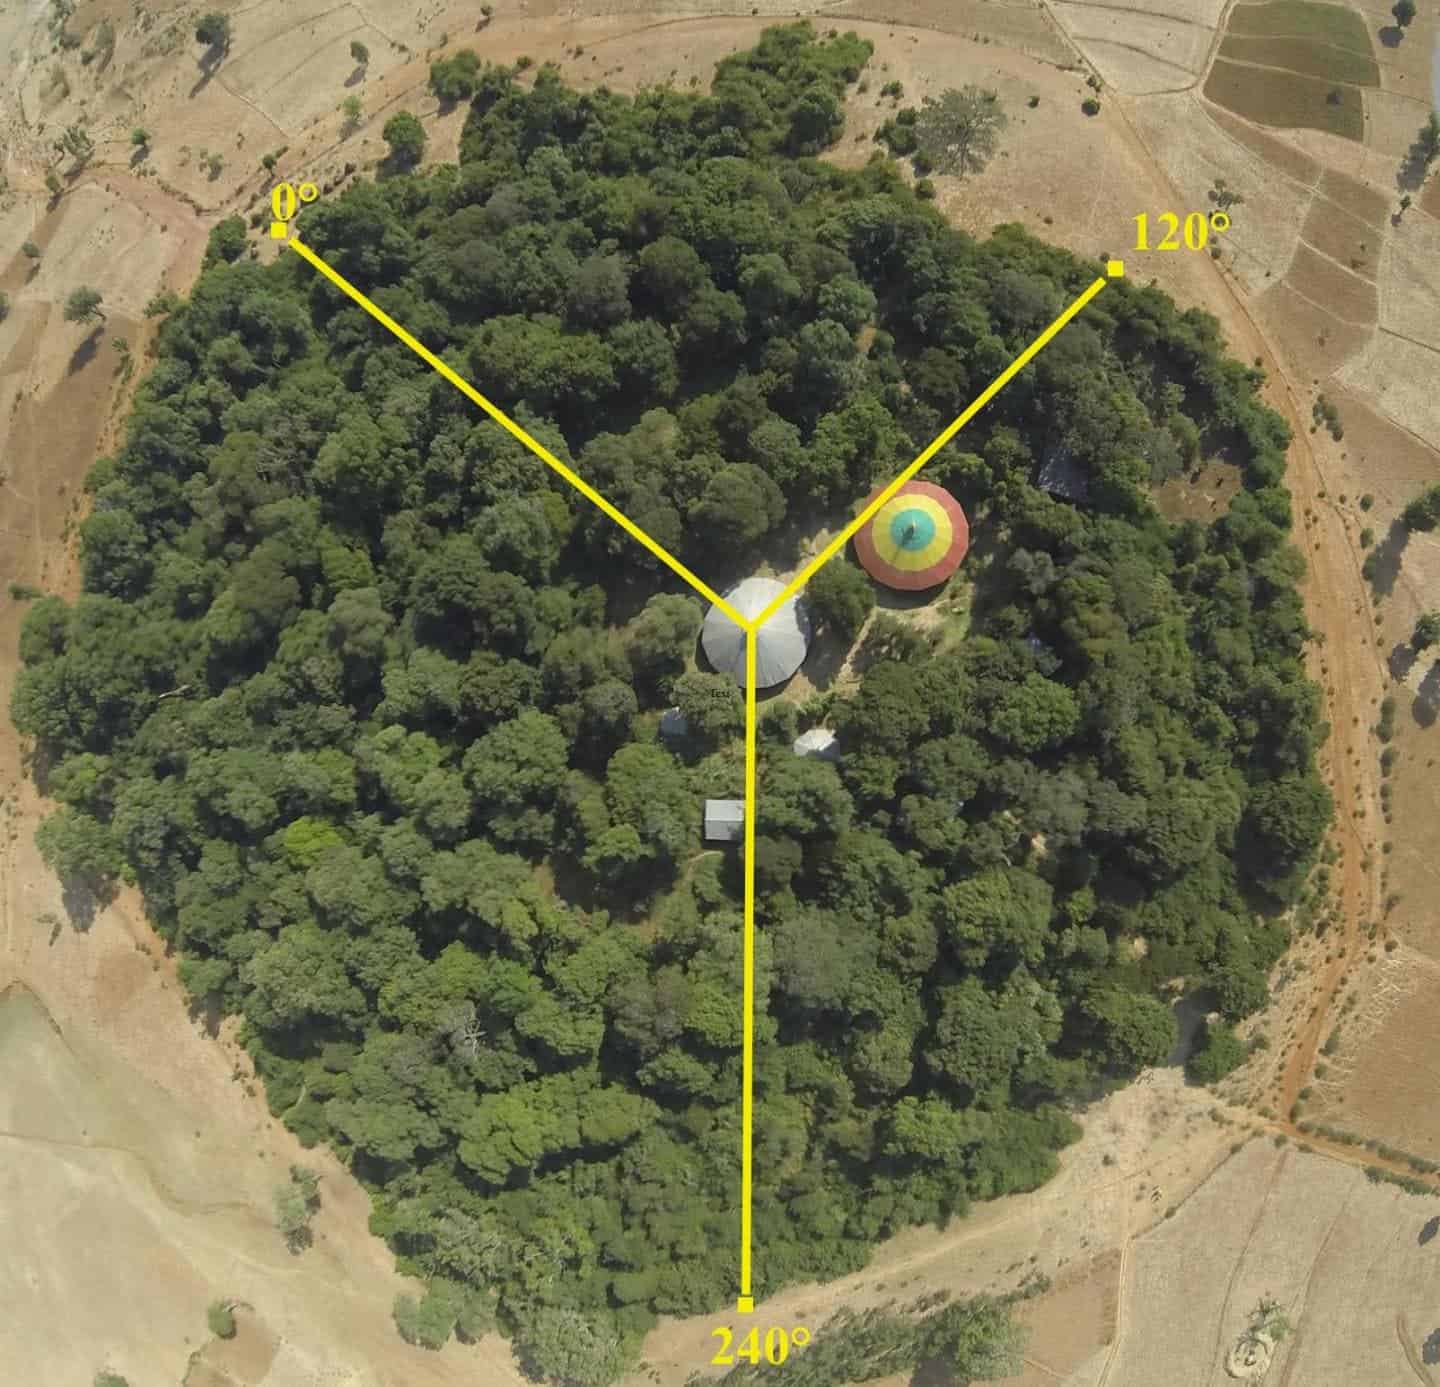 Church forest with transect design for the quantification of plant species richness, density. Image credits: Catherine Cardelús.